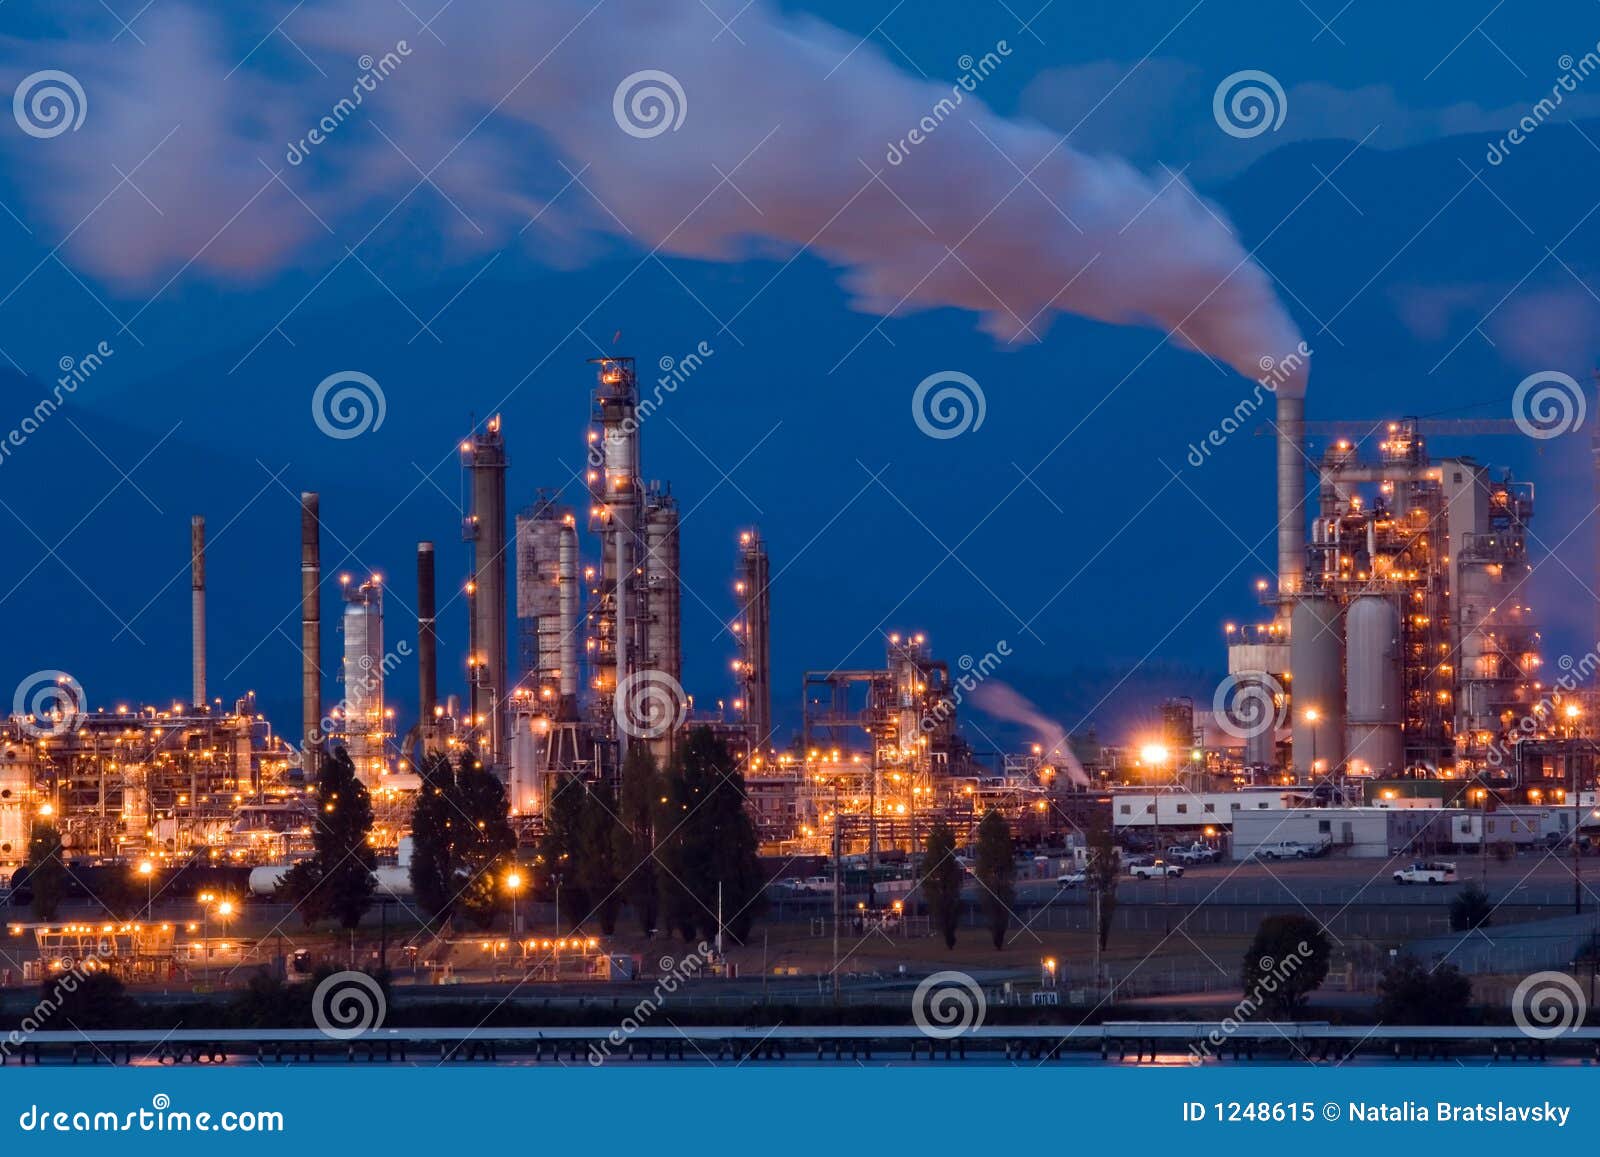 refinery pictures free downloads